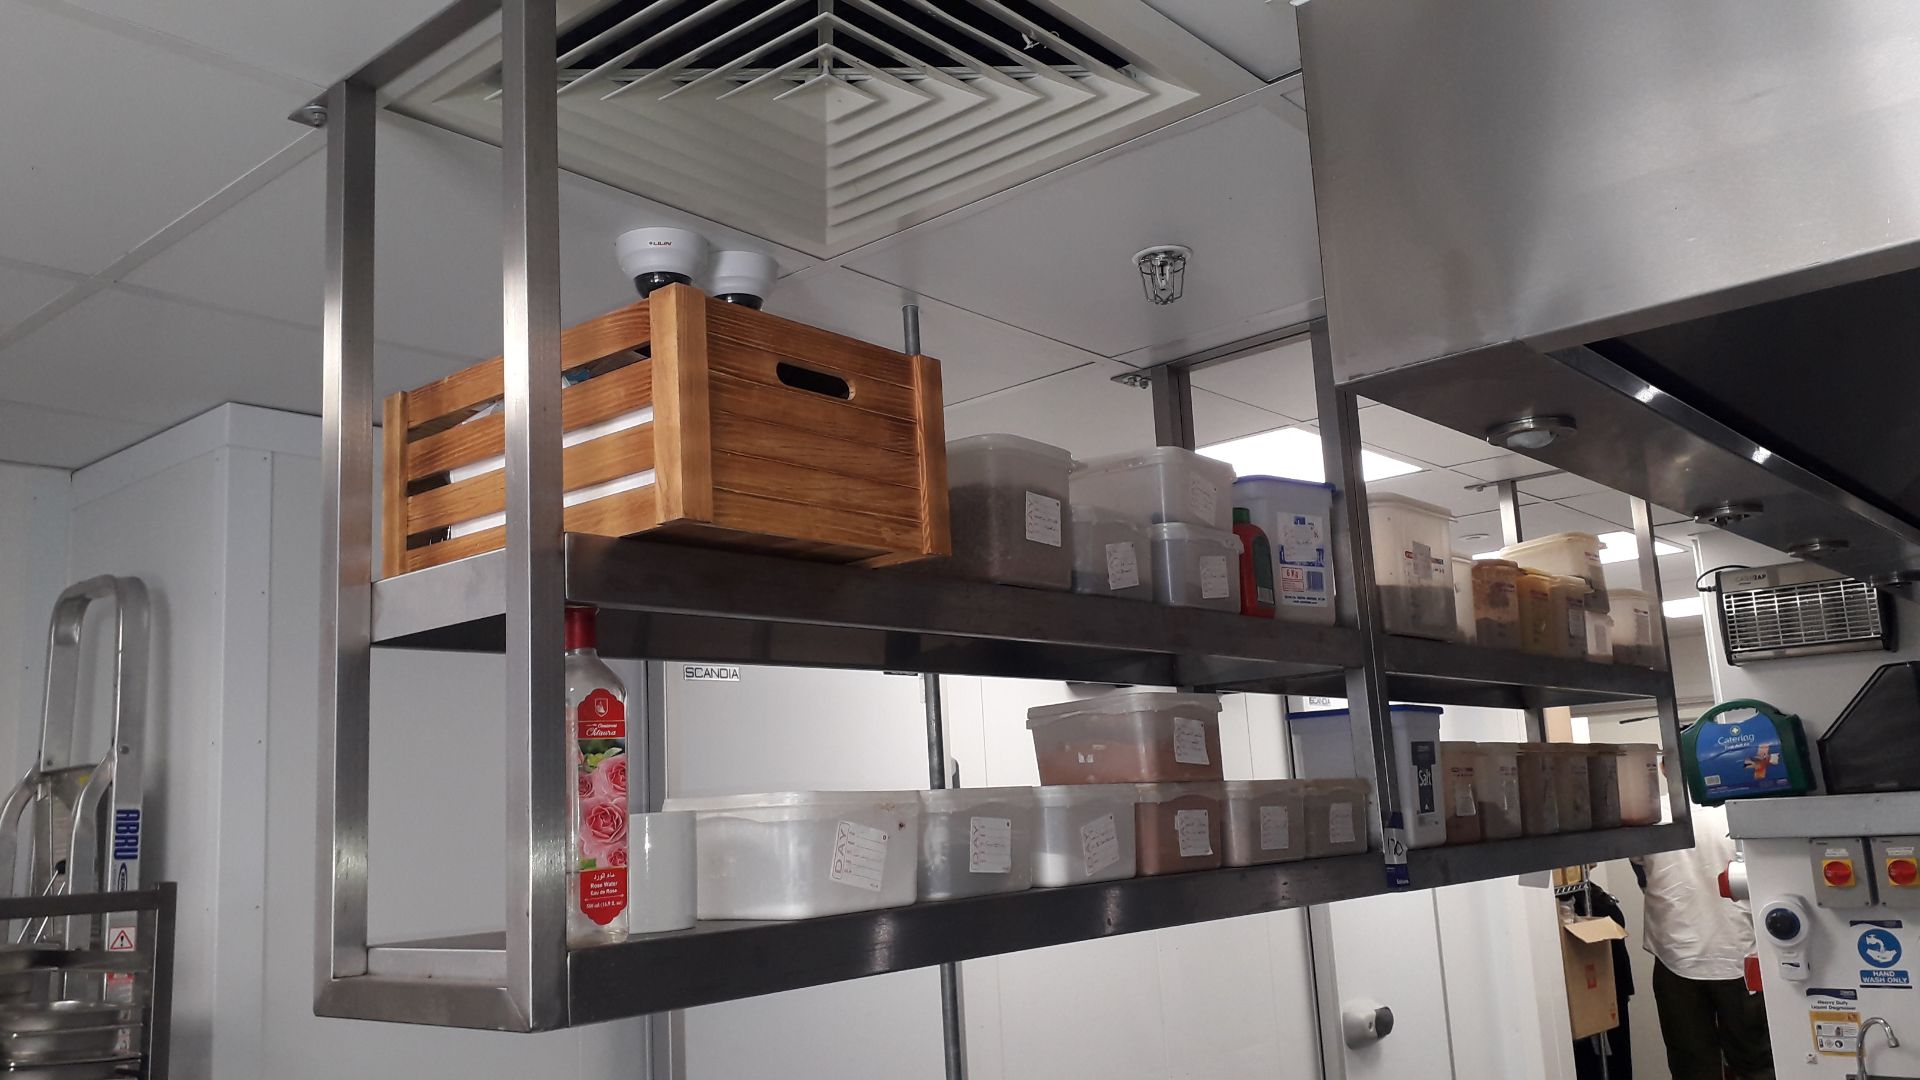 2 x Stainless Steel Ceiling Mounted Double Shelf 1350 x 300 x 800 Excludes Contents (Purchaser to - Image 2 of 3